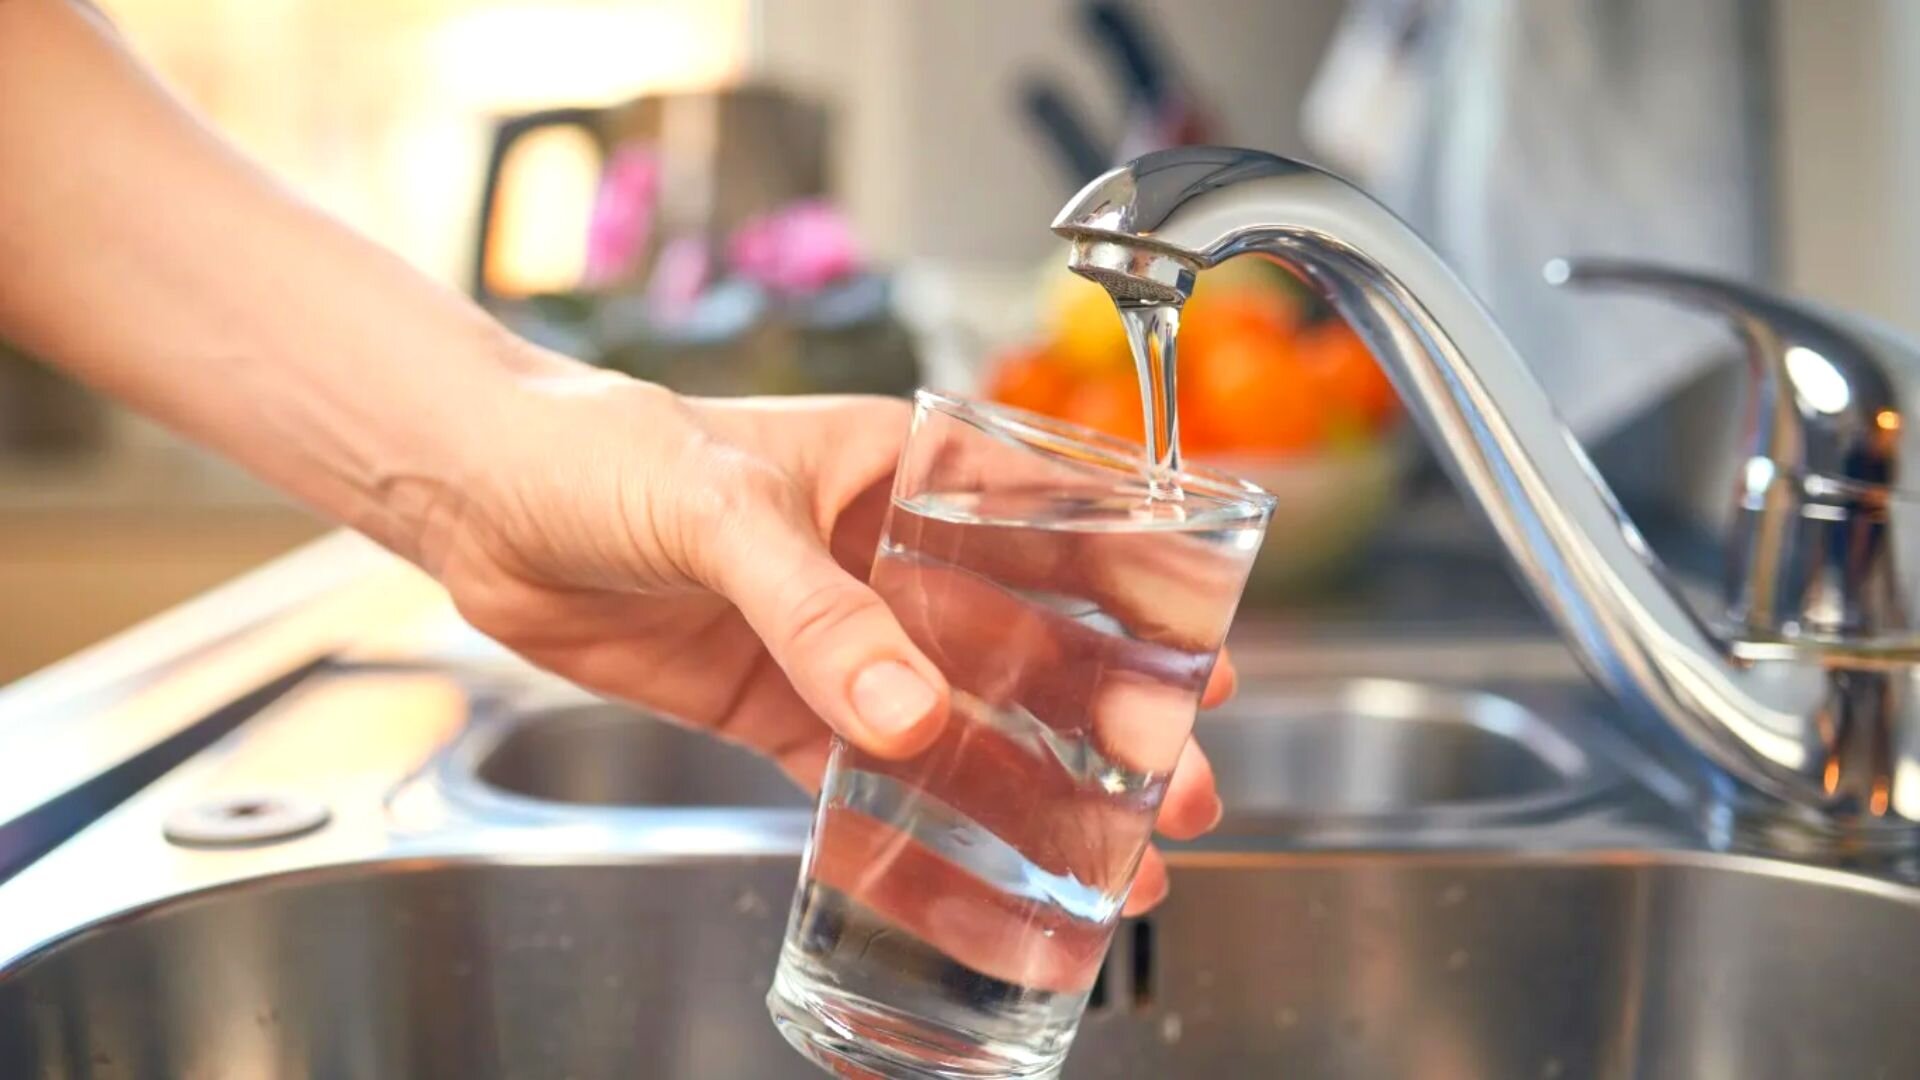 Tips To Save Water Around Your Home